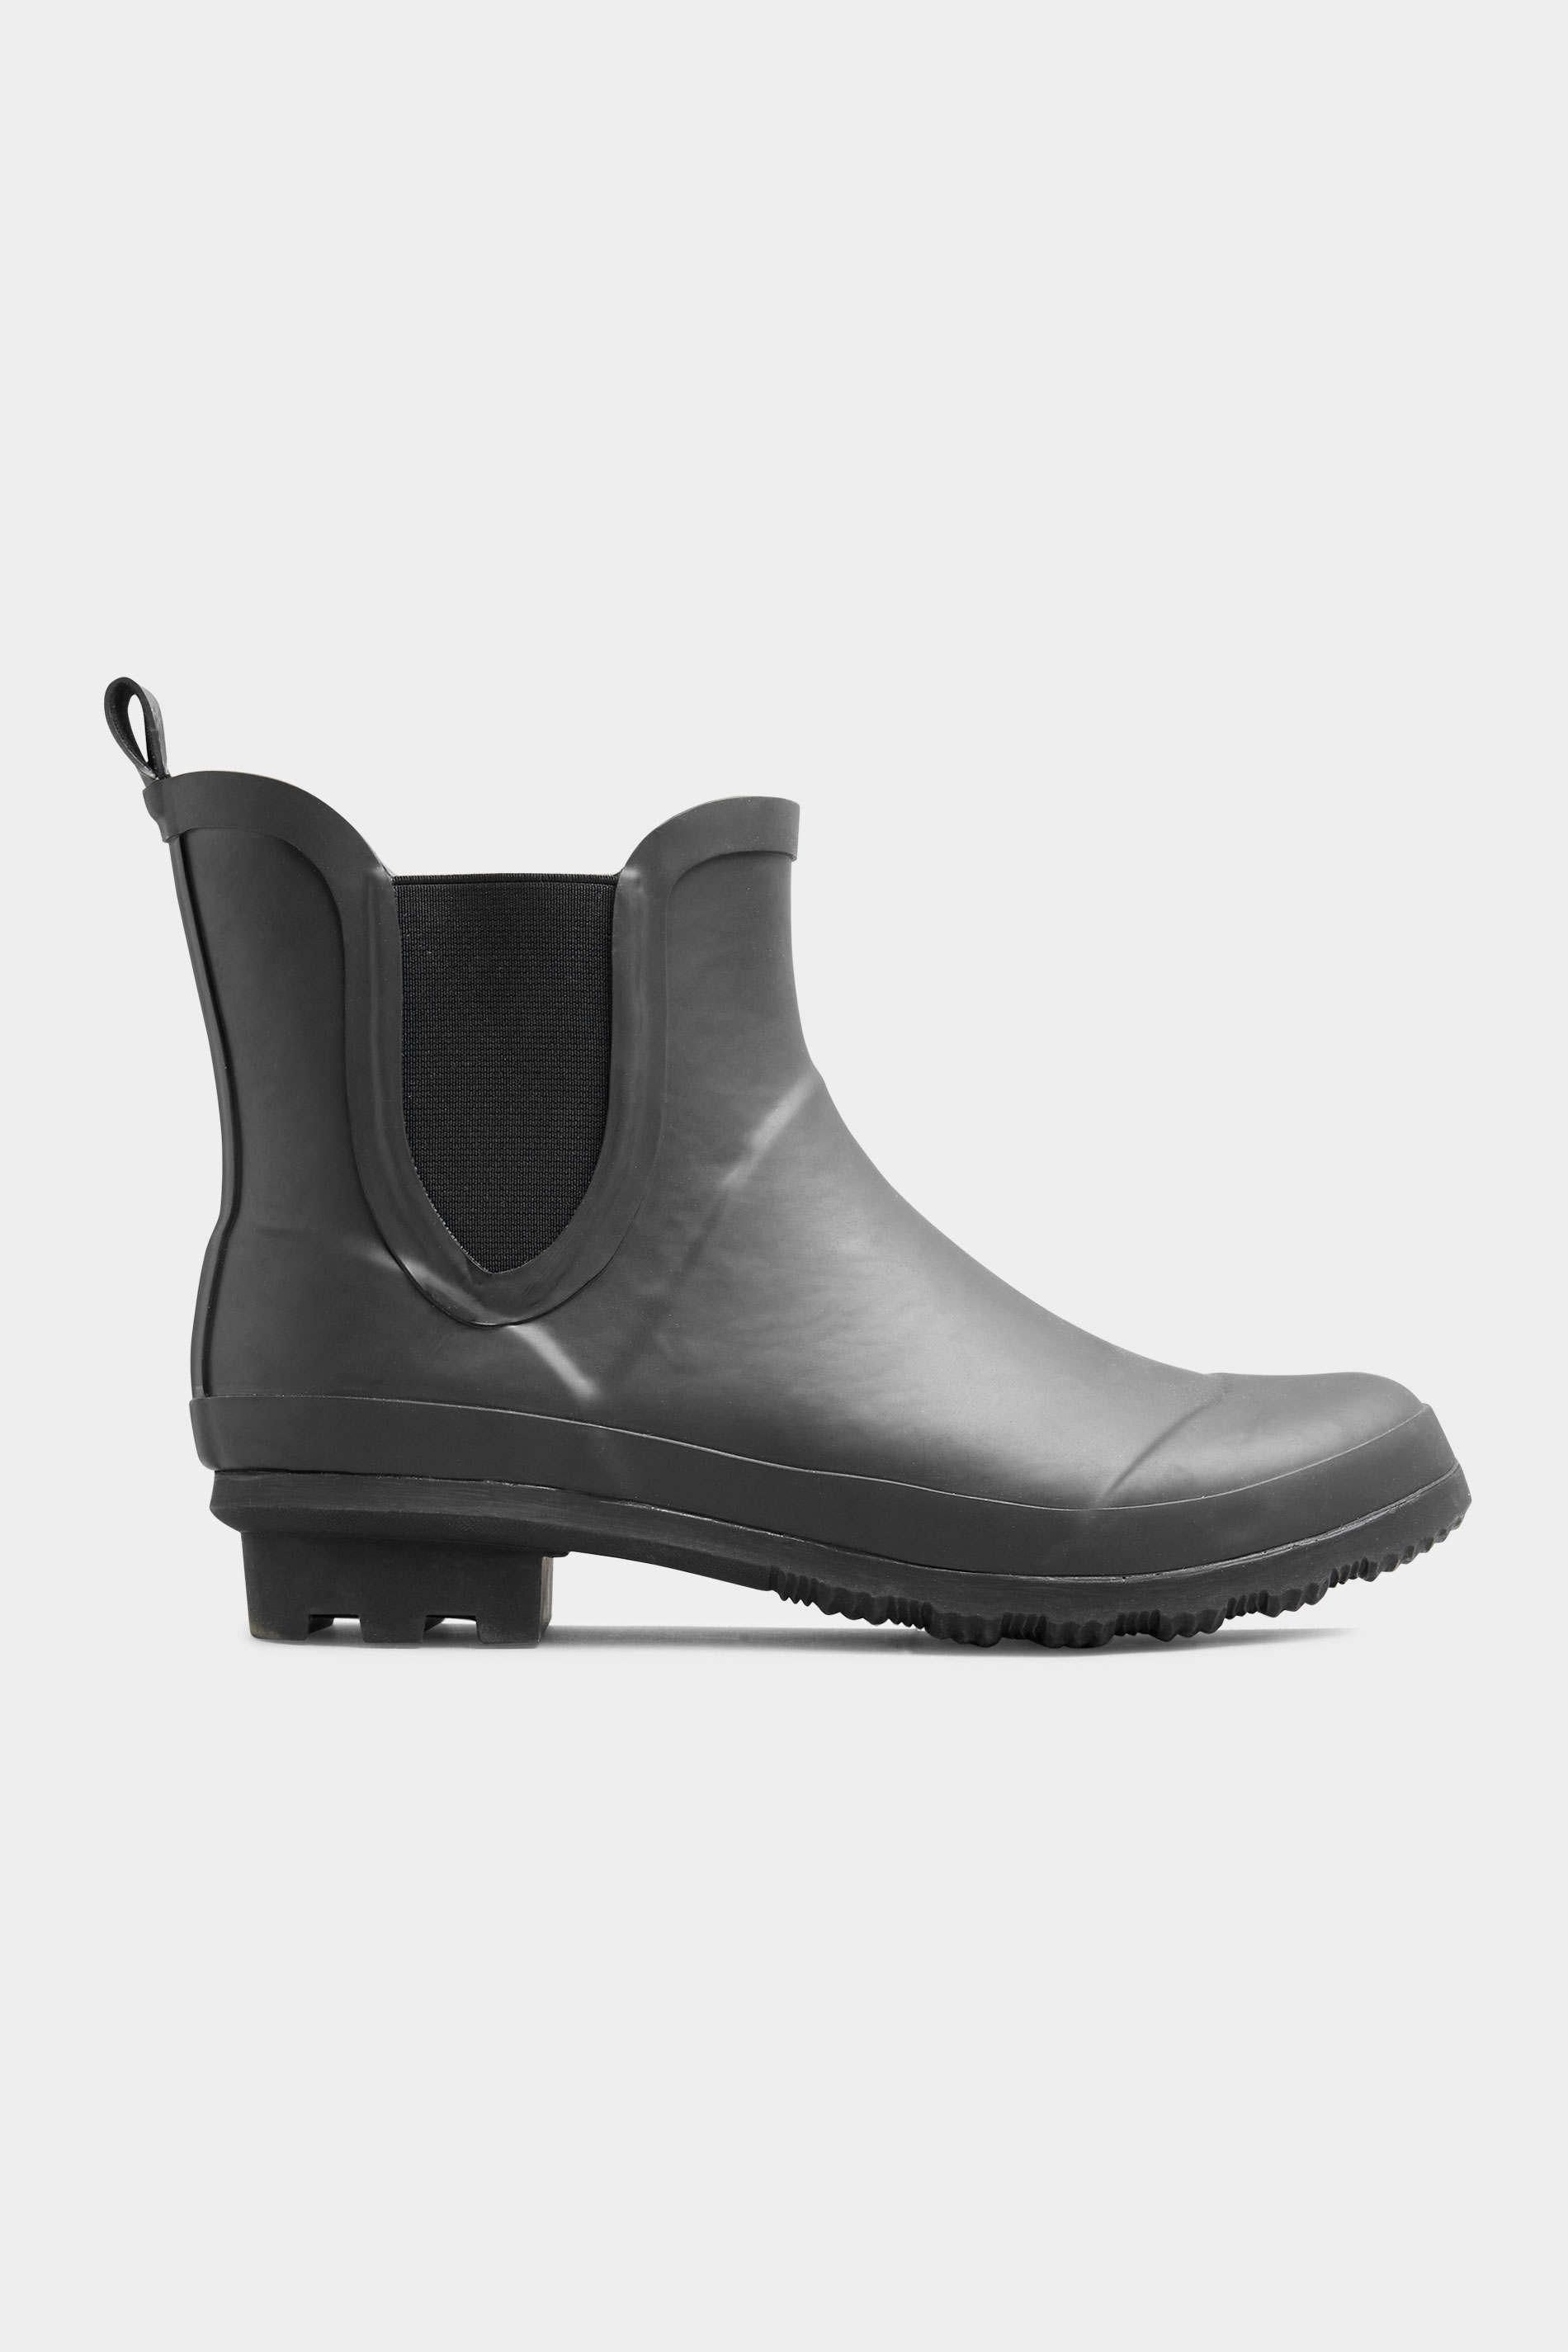 Extra Wide Fit Black Chelsea Welly Boots In EEE Fit | Long Tall Sally